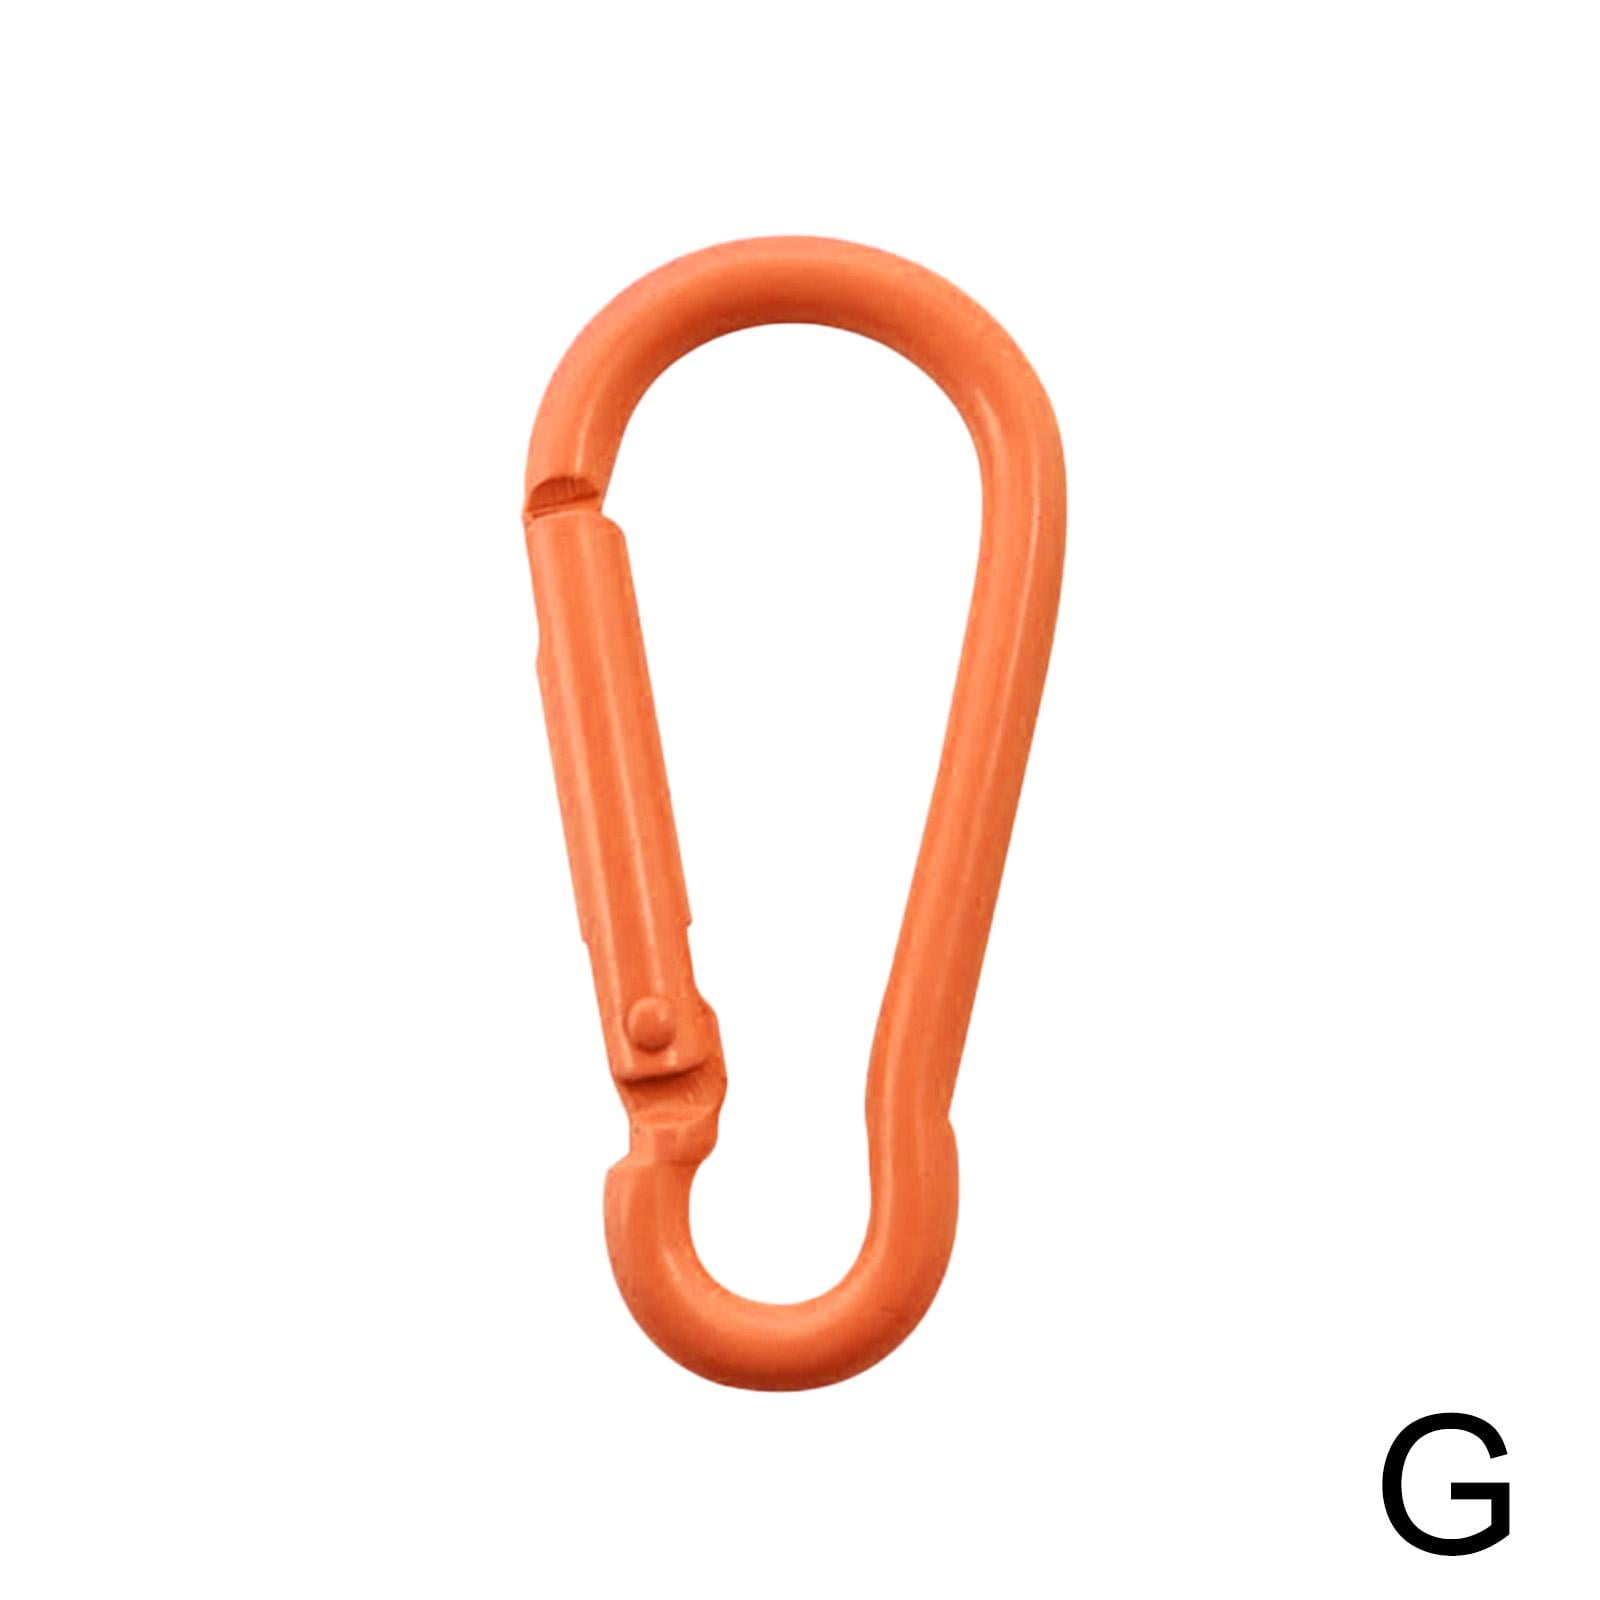  ABCOOL 7PCS Keychain Keyring Clips Mini Carabiner - 1 inch  Micro Tiny Small Fixed Eye Hole Paracord Aluminum Hooks for Home Rv Camping  Fishing Hiking Traveling and Sports Outdoors : Sports